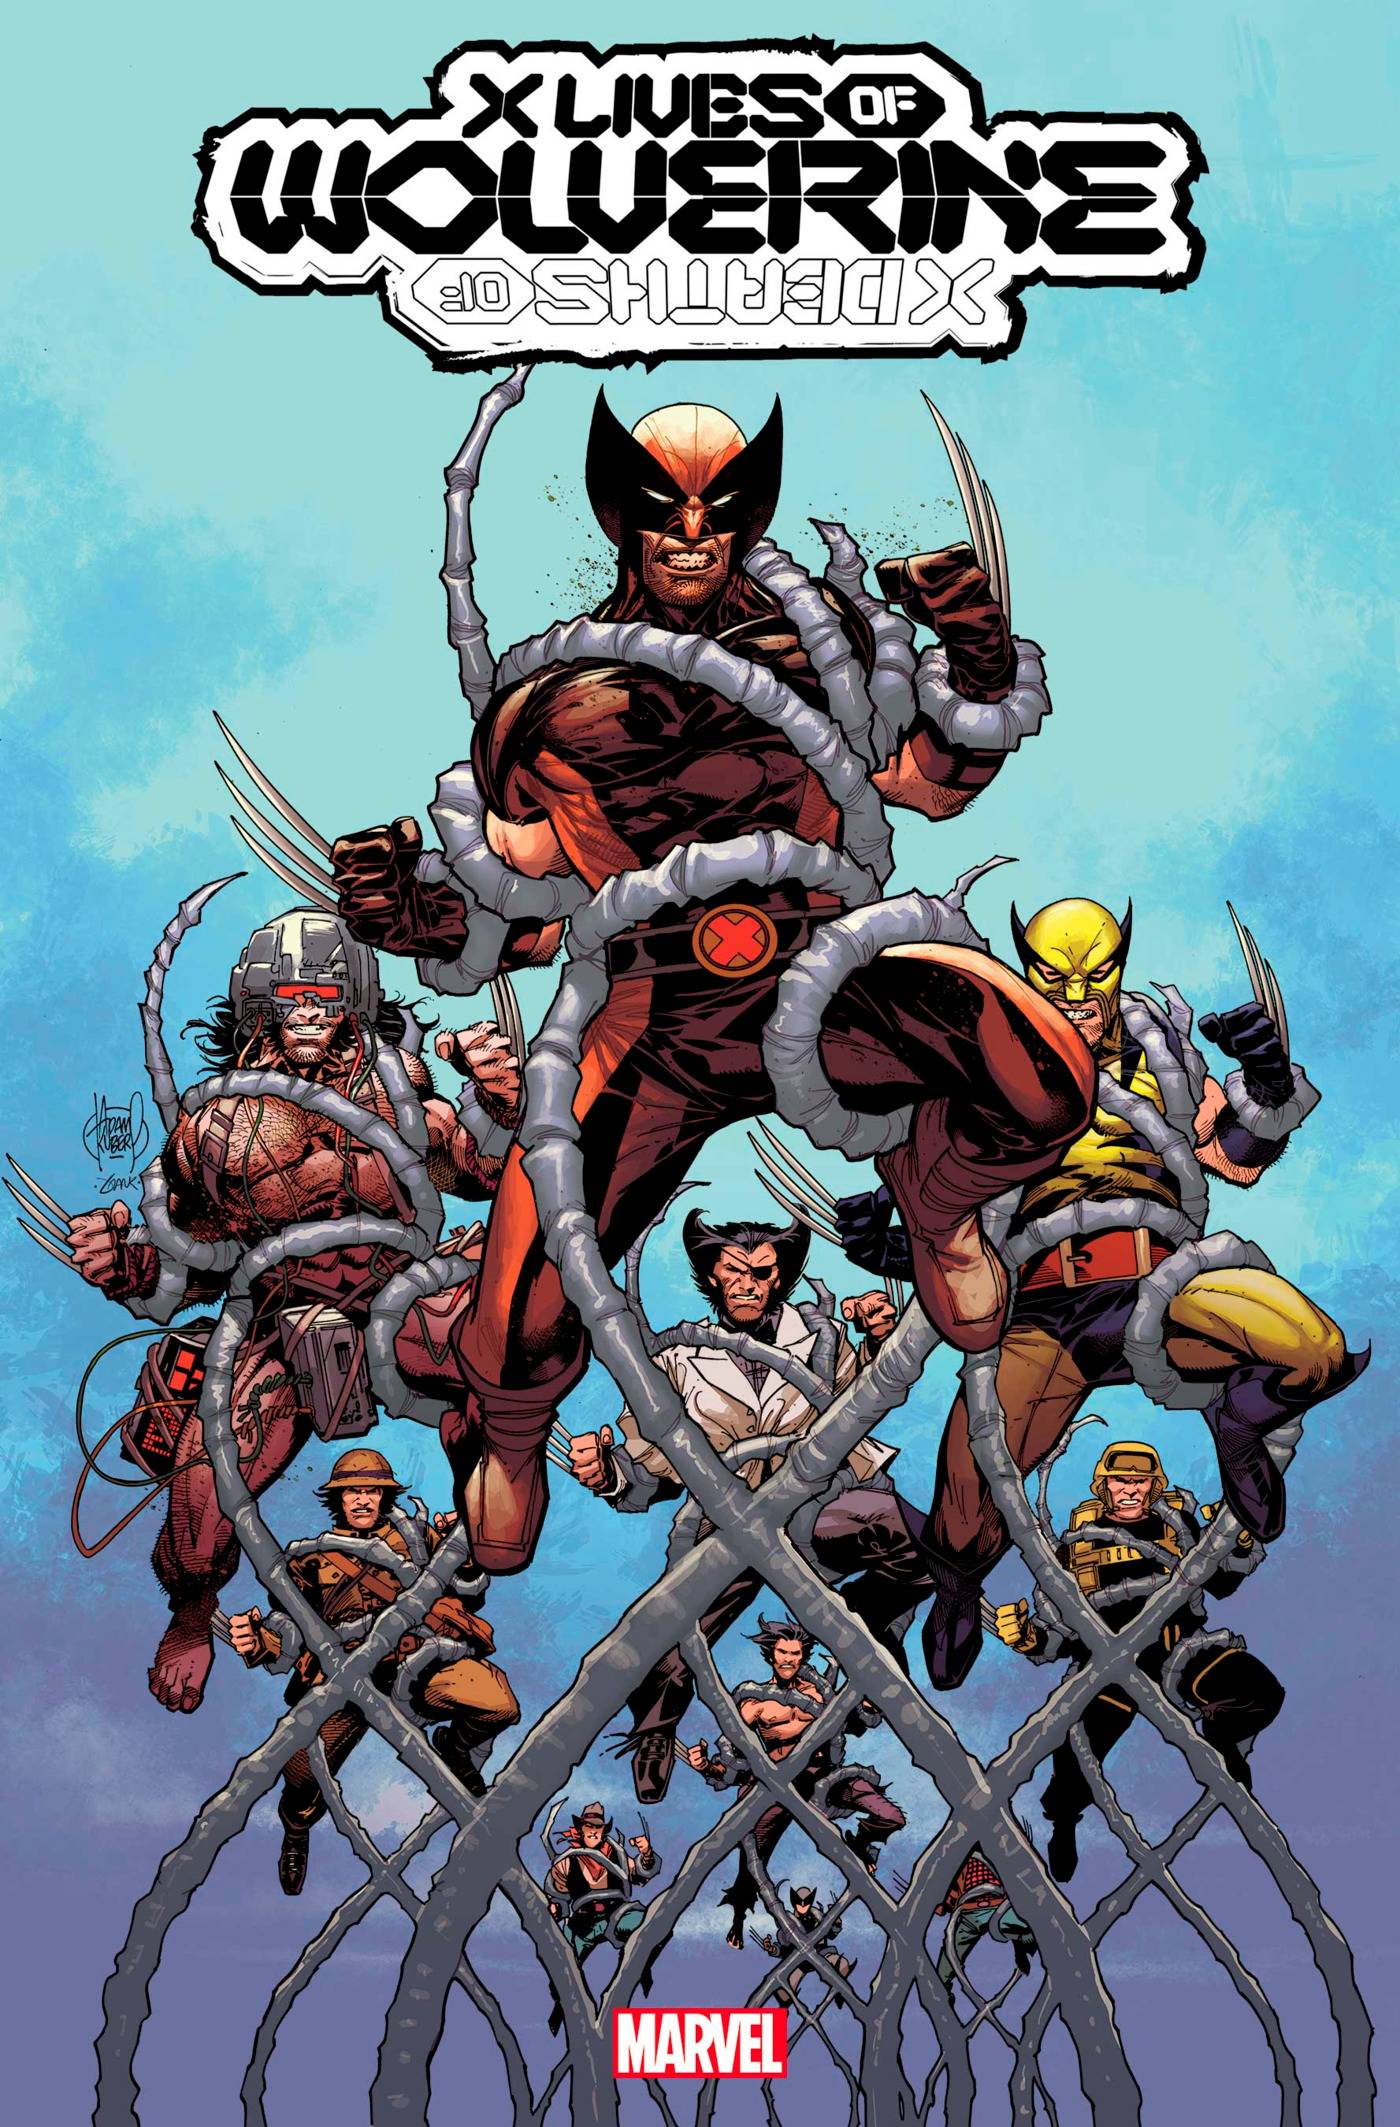 01/19/2022 THE X LIVES OF WOLVERINE #1